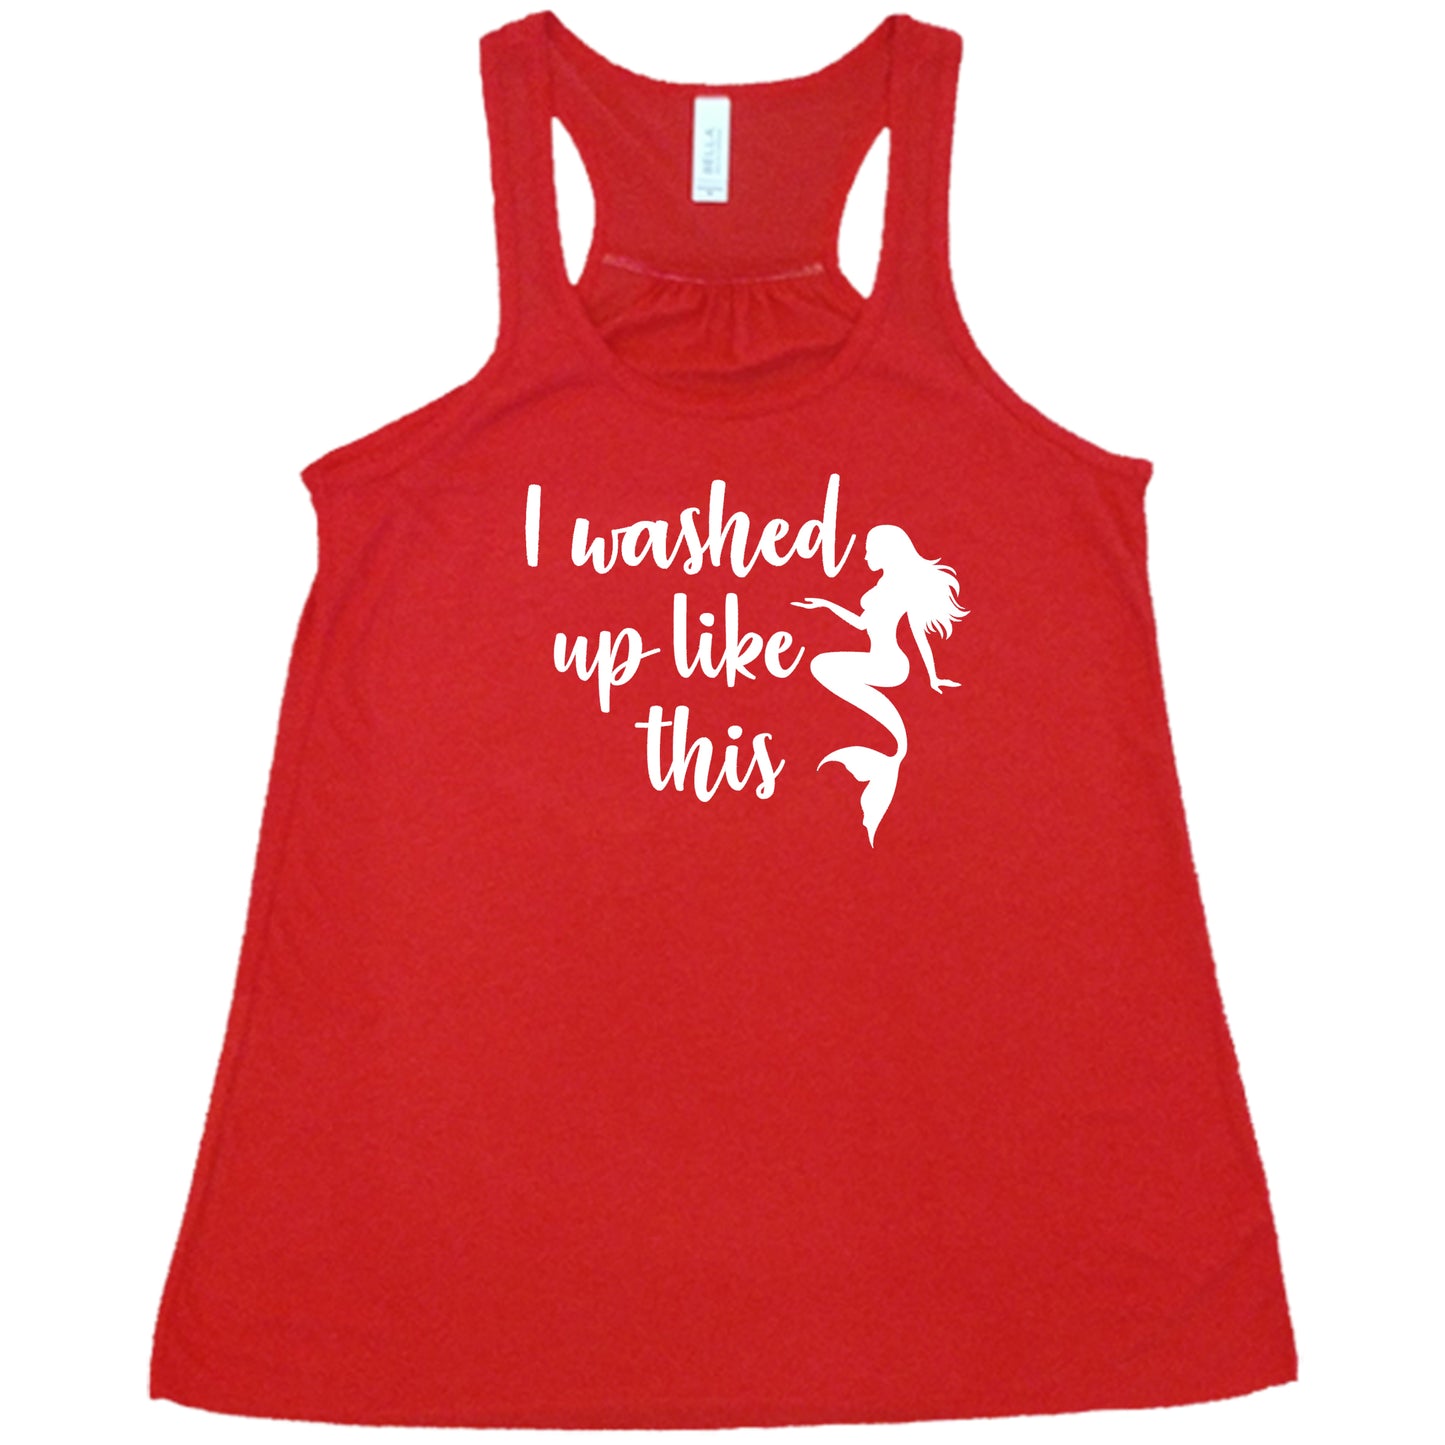 red racerback tank with the saying "i washed up like this" in white in the center